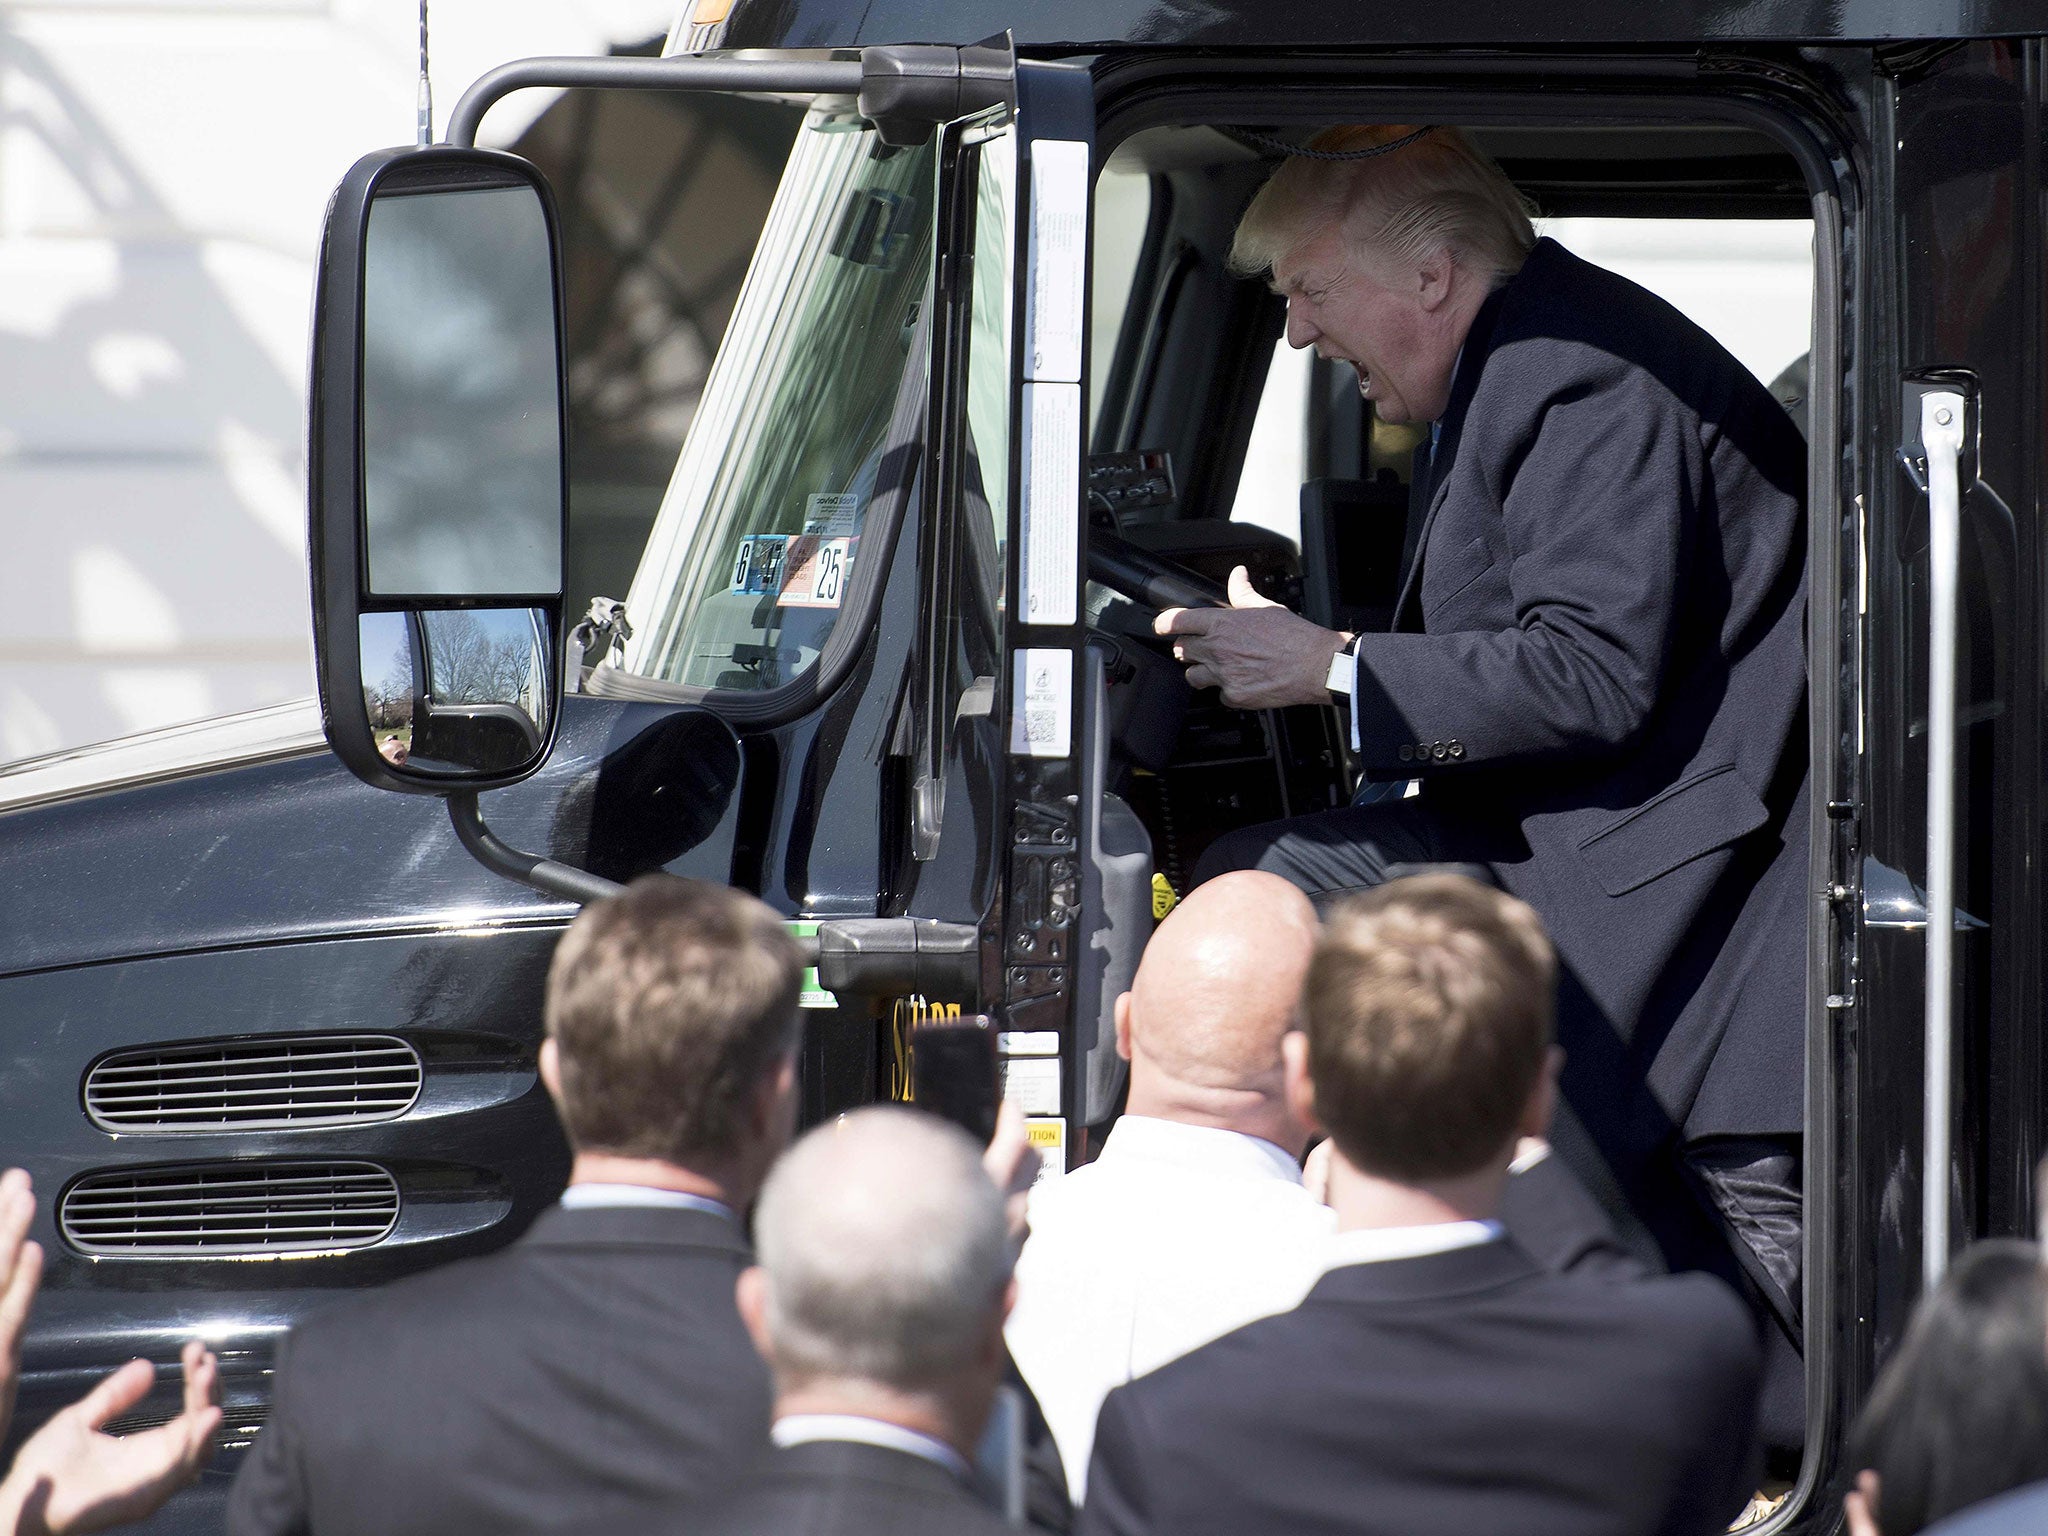 Donald Trump sits in the drivers seat of a semi-truck as he welcomes truckers and CEOs to the White House in Washington, DC, March 23, 2017